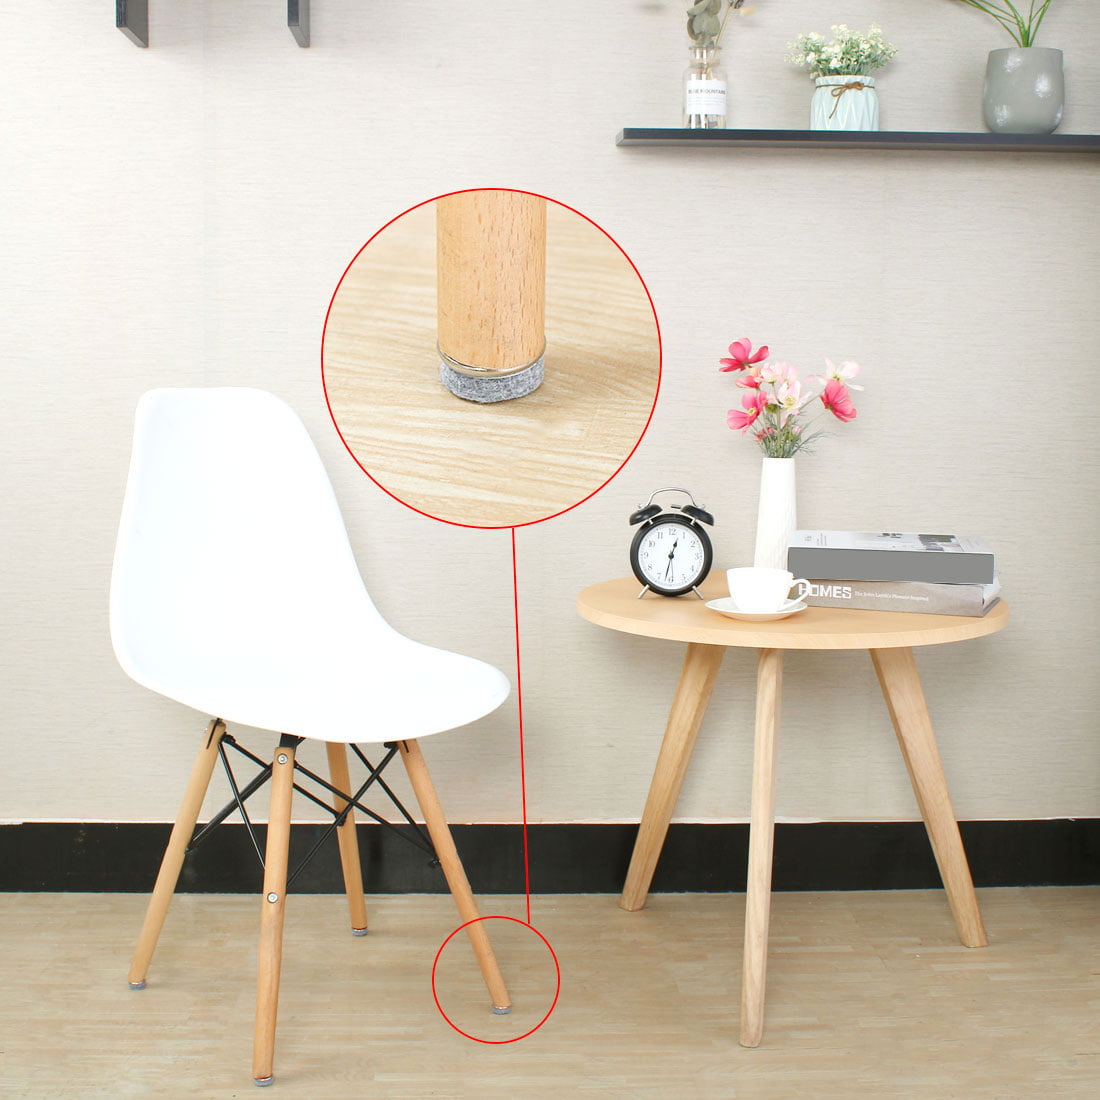 28mm Glider White Felt Stable Professional Quality Furniture Nail 28 